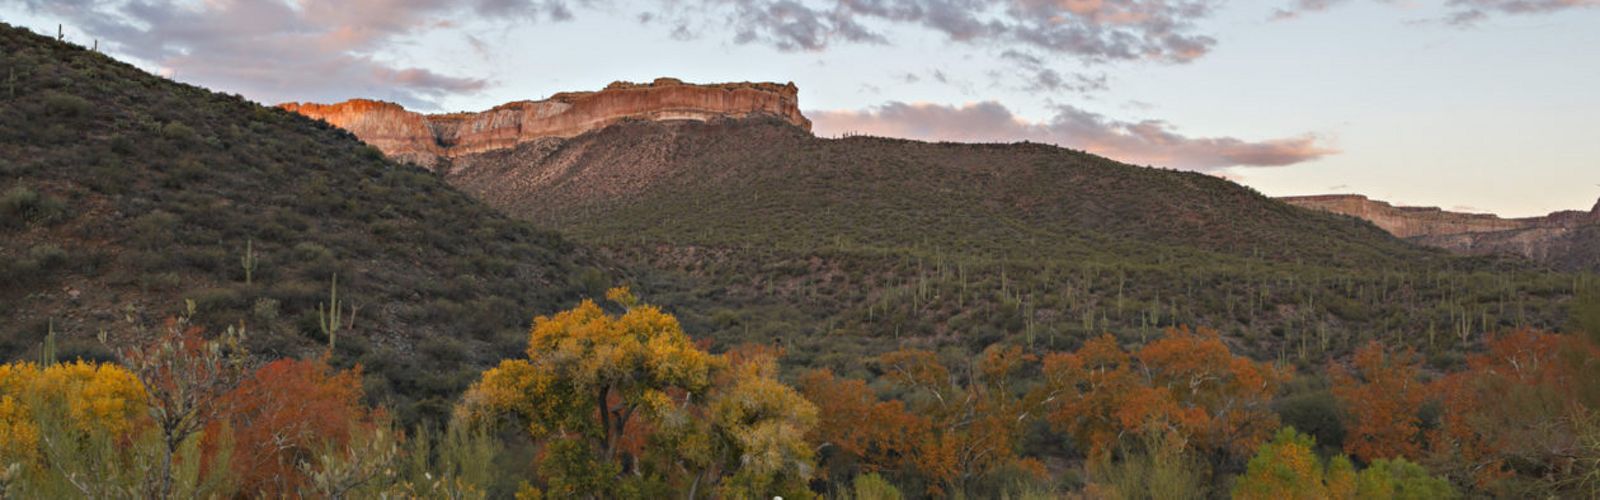 The vertical cliffs of Aravaipa Canyon stand as witness to the lowlands that meet the northern edge of the Galiuros in Arizona.